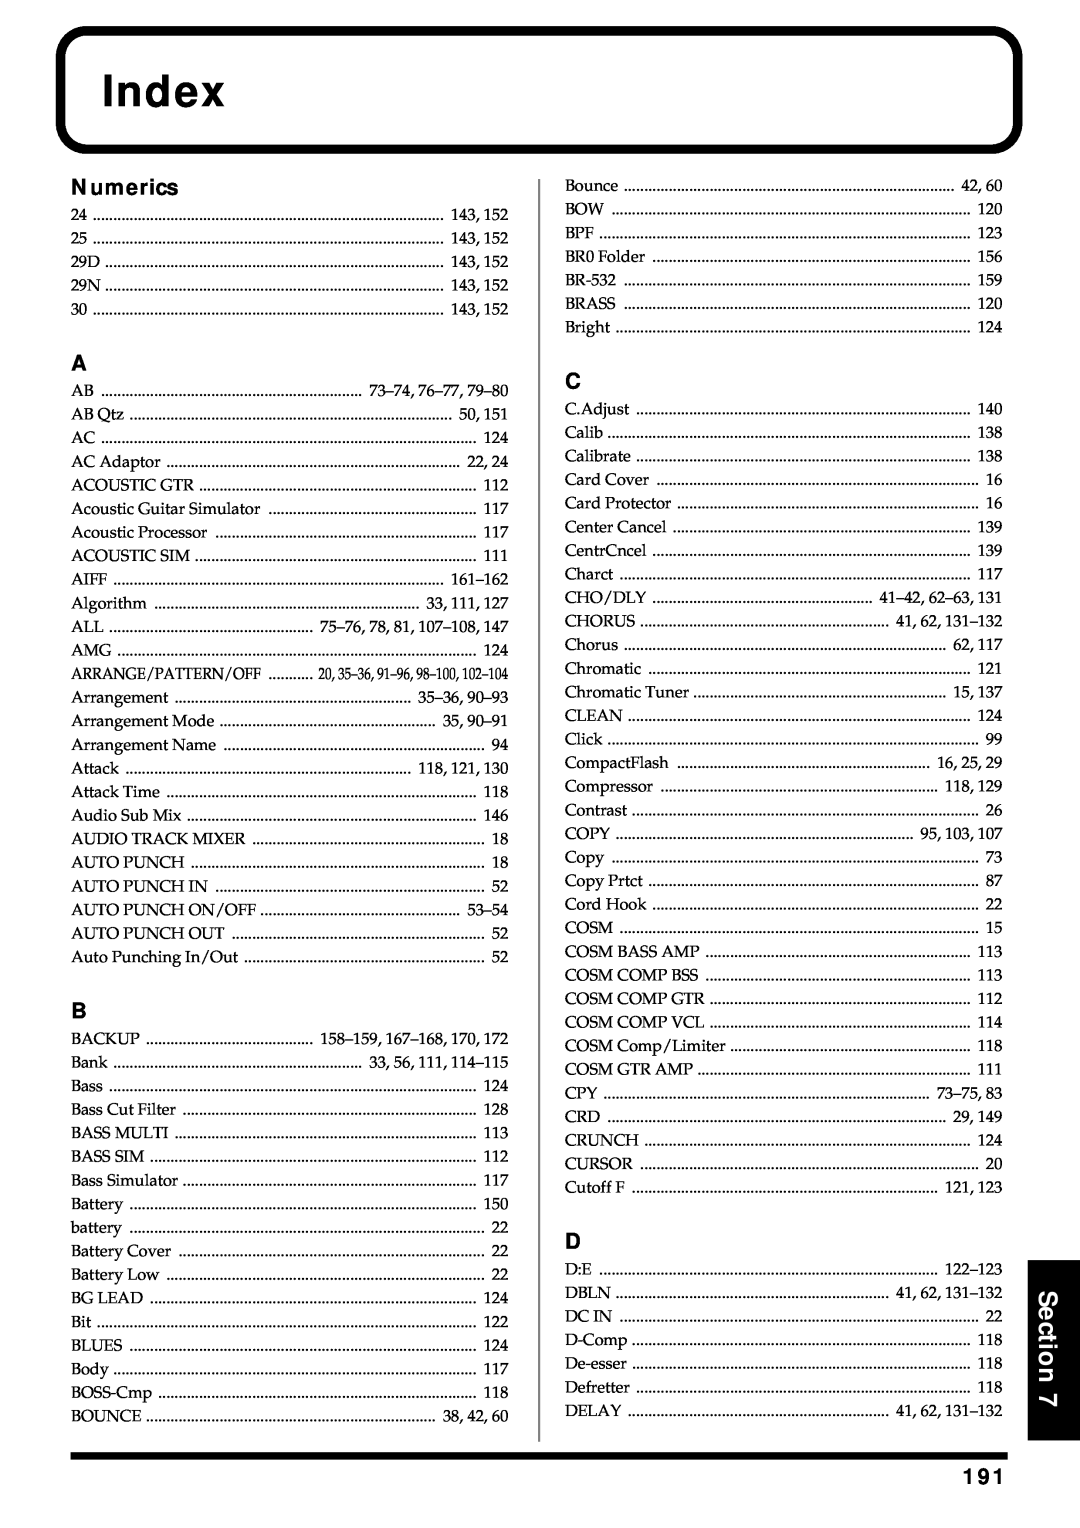 Roland BR-864 owner manual Index, Section, Numerics 